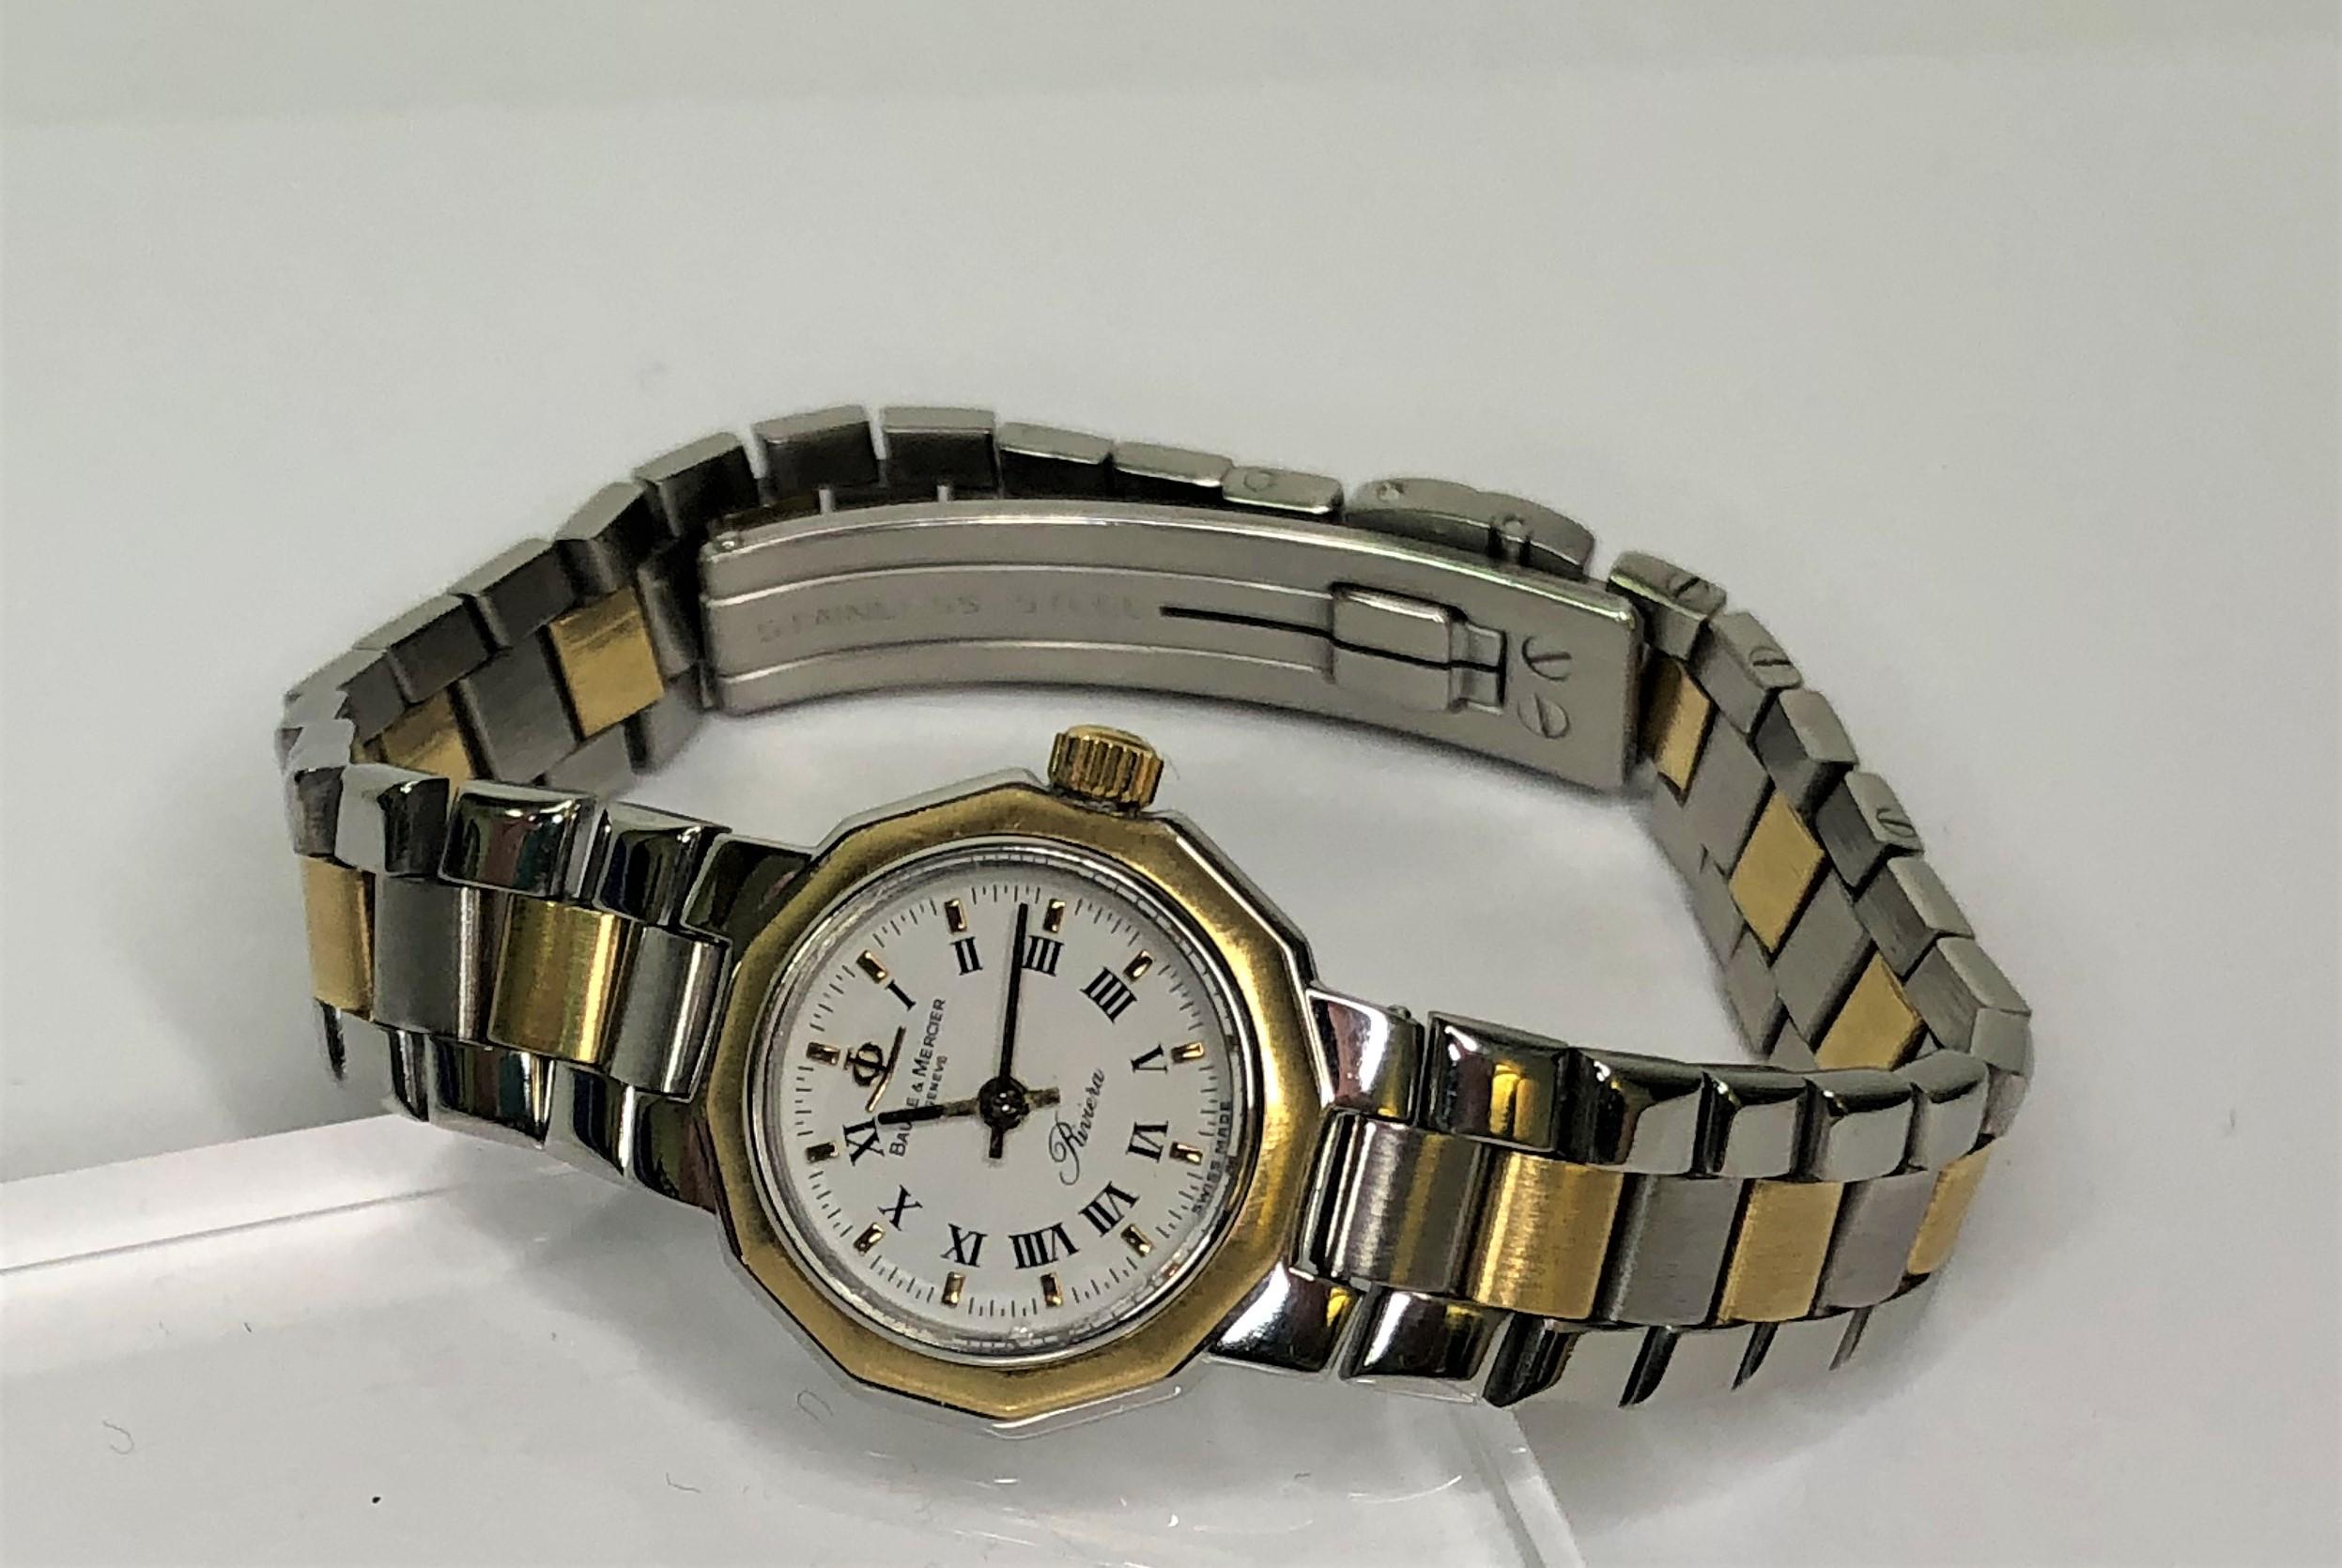 Baume & Mercier Geneve Riviera watch.
Two tone watch with 18 karat yellow gold and sterling silver.
White face with Roman numeral hour marks.
Band graduates from approximately 12mm near face to 10mm near clasp.  
Face is approximately 20mm wide